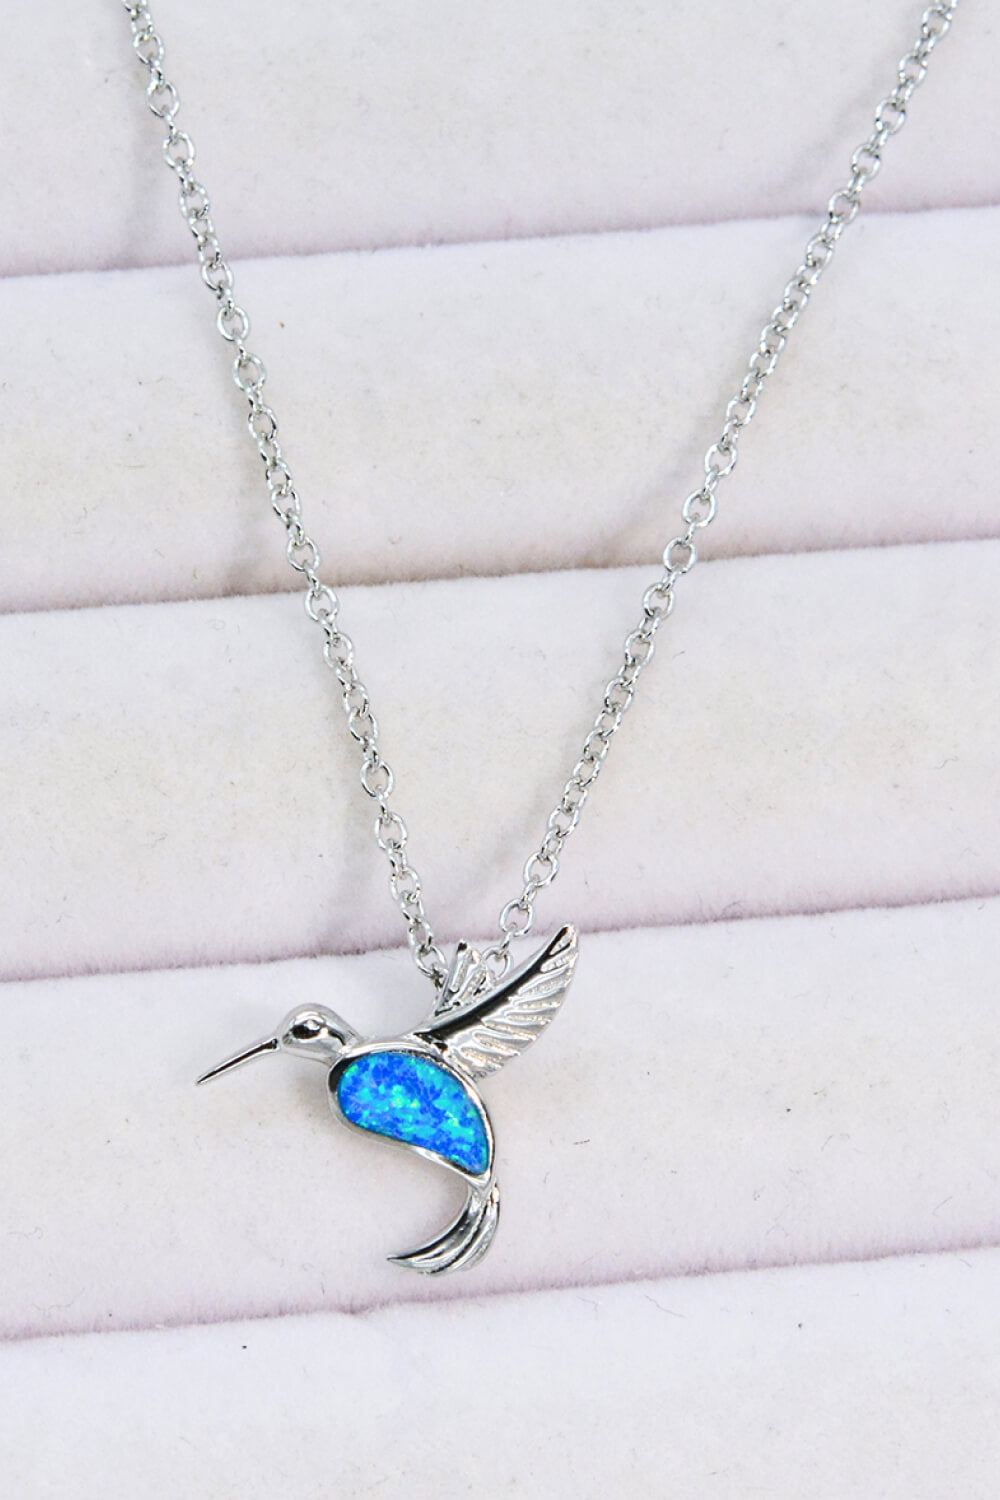 Opal Bird 925 Sterling Silver Necklace - Tophatter Shopping Deals - Electronics, Jewelry, Auction, App, Bidding, Gadgets, Fashion